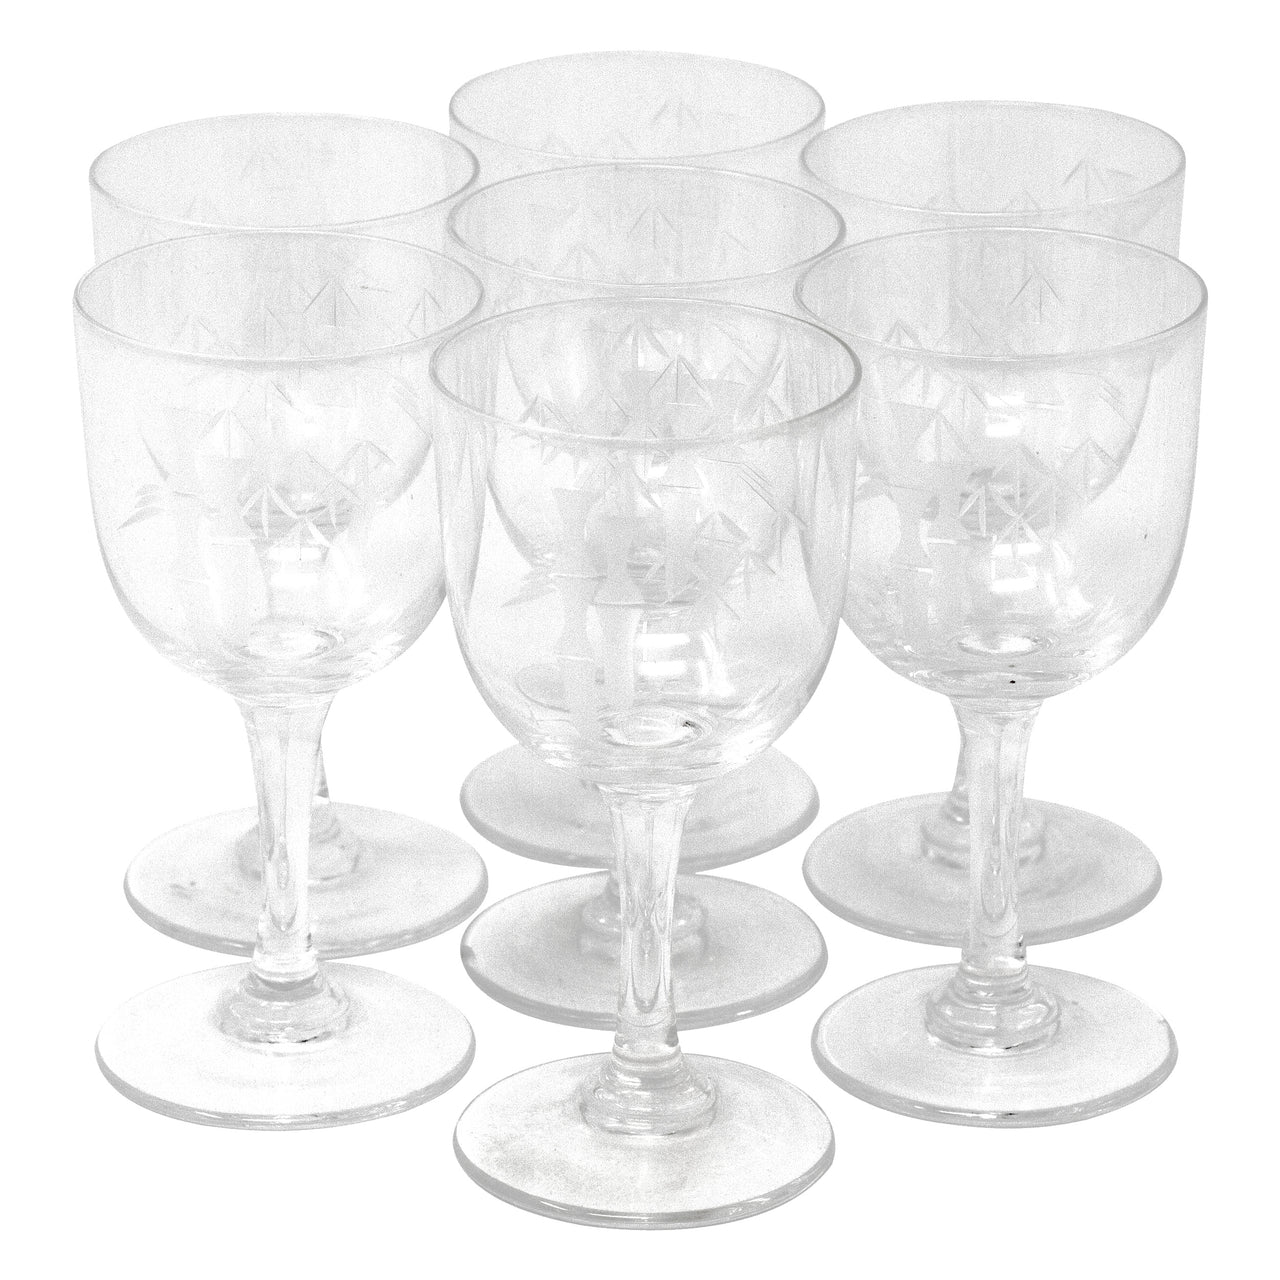 Vintage Mid Century Etched Bamboo Cordial Glasses | The Hour Shop